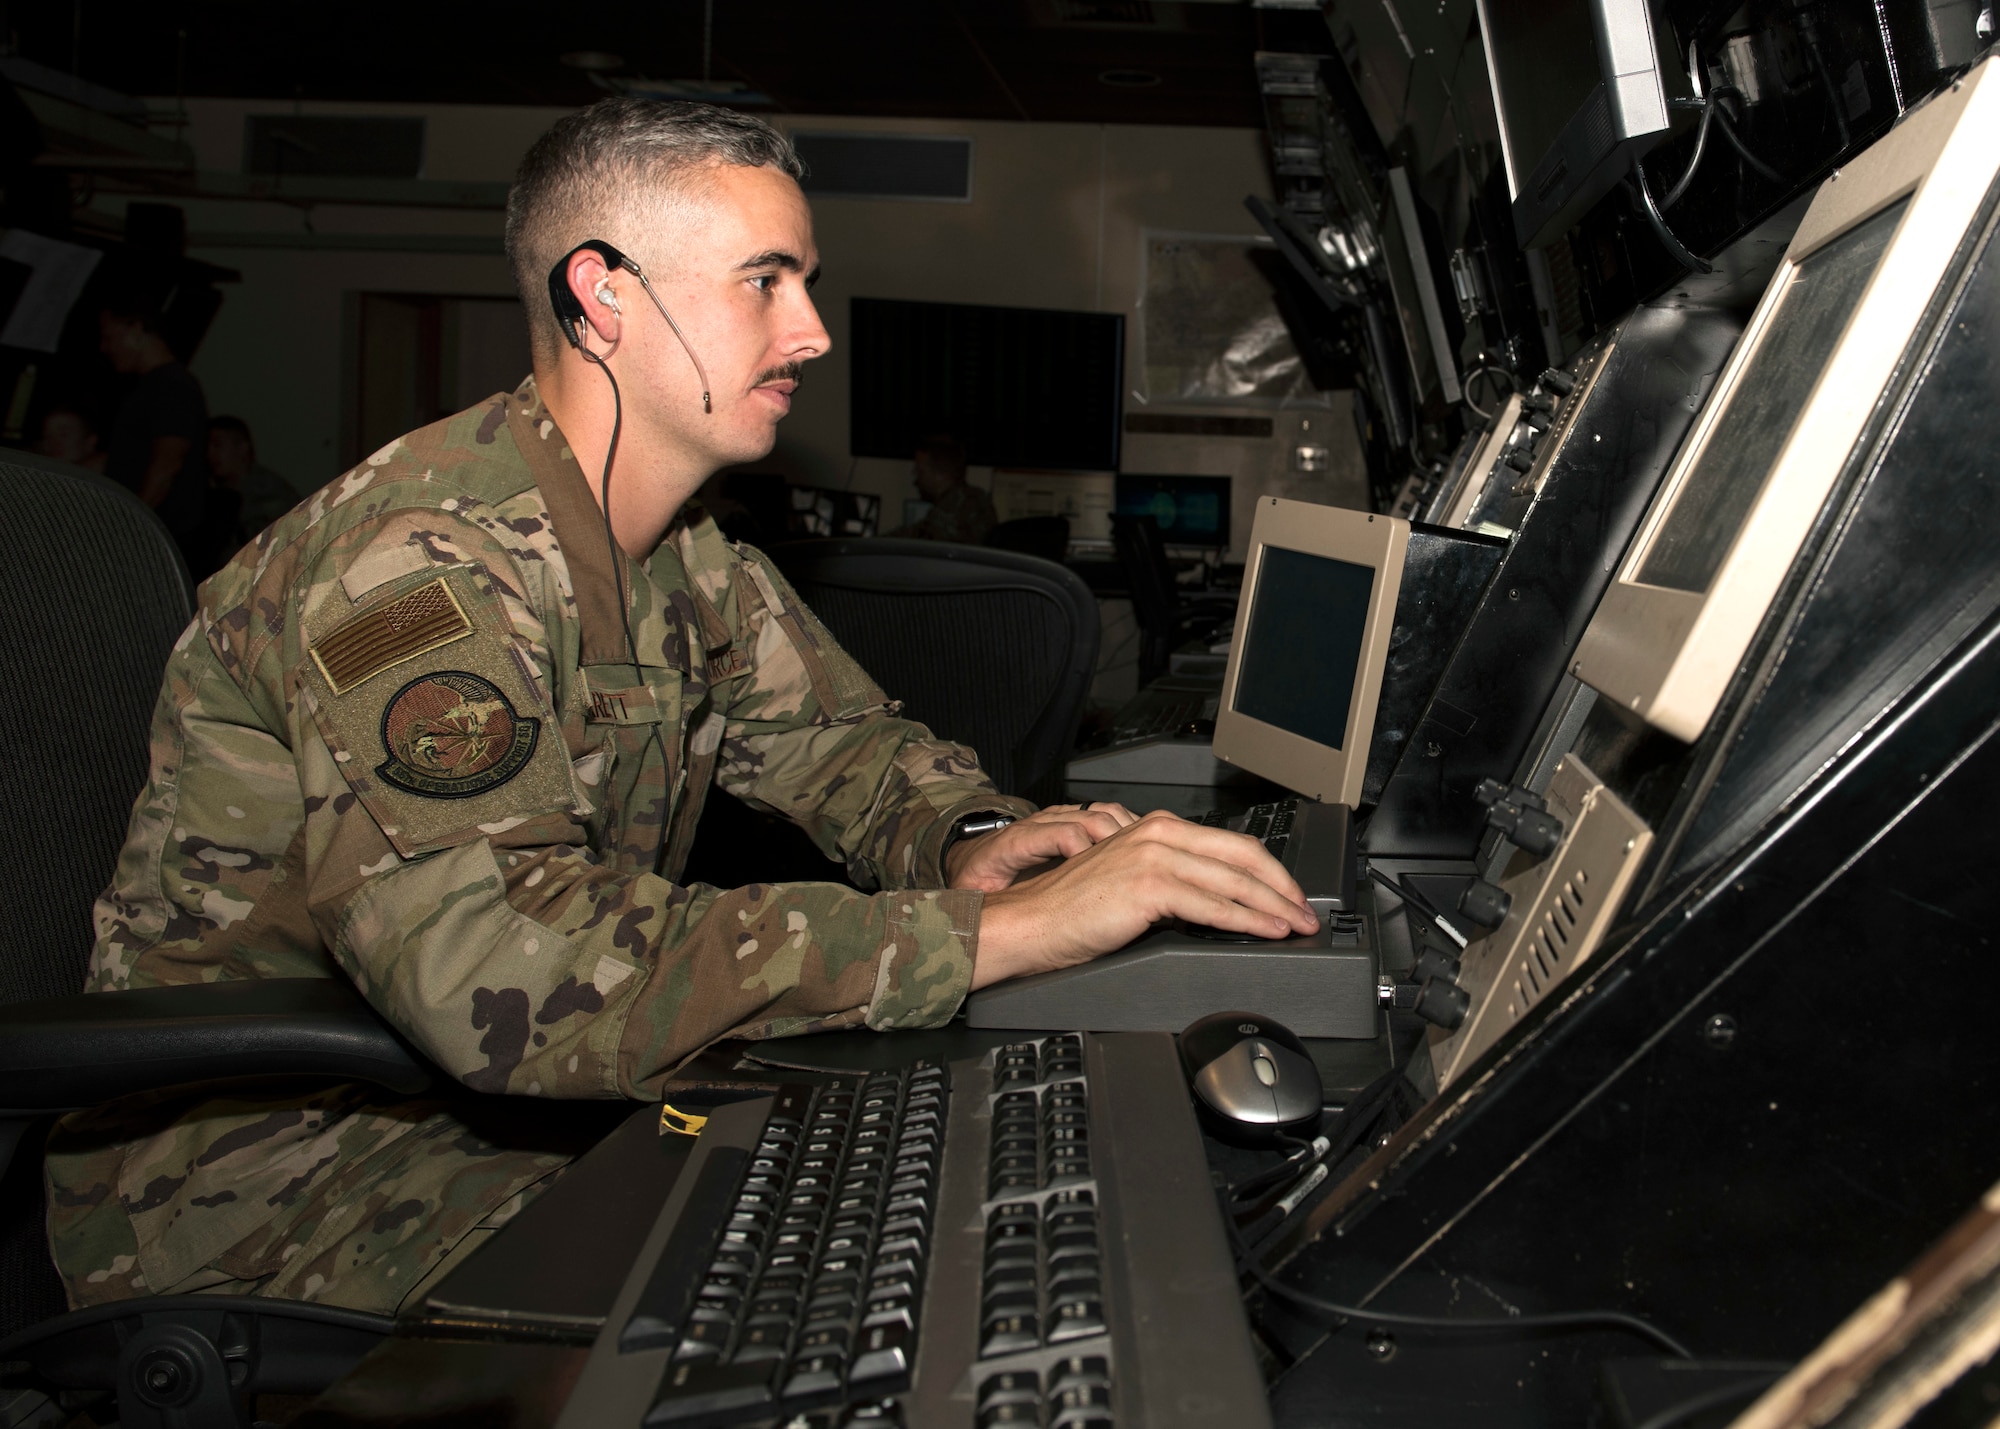 Staff Sgt. George Garrett, 56th Operation Support Squadron air traffic controller, plots the location of aircraft on a radar scope July 10, 2019, at Luke Air Force Base, Ariz.